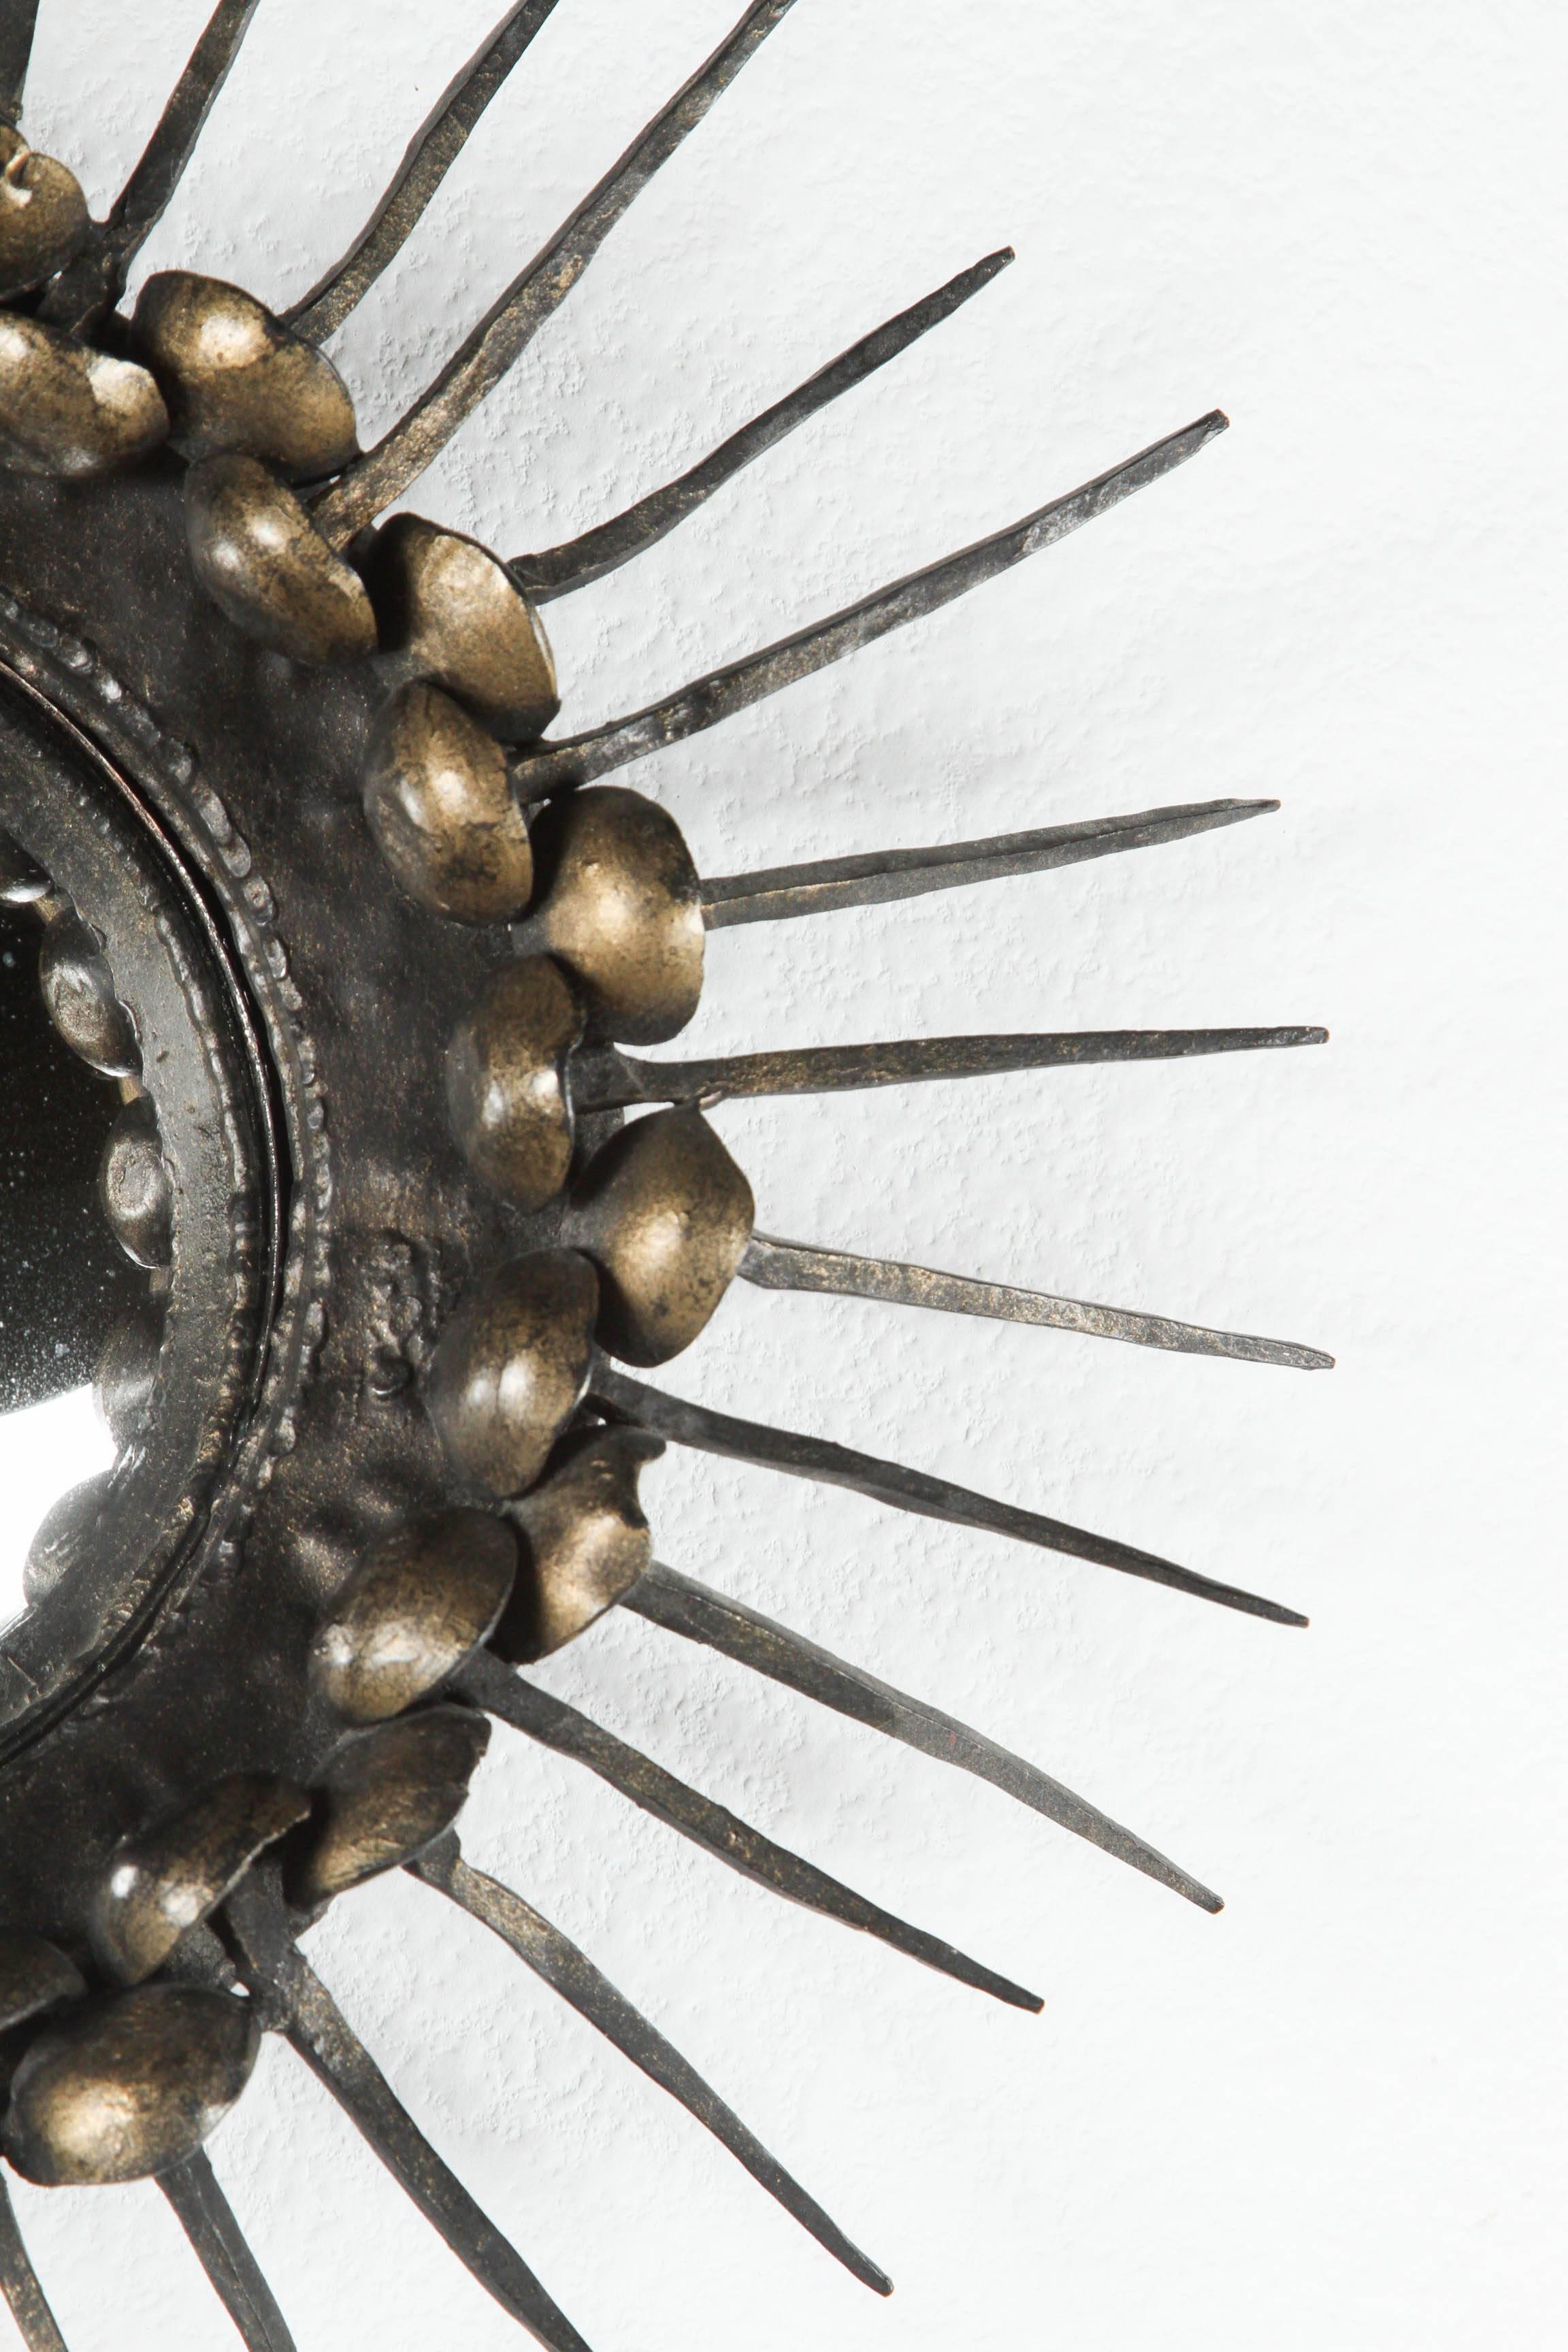  Small Convex sunburst mirror with a frame of spikes, with large brass nailheads.